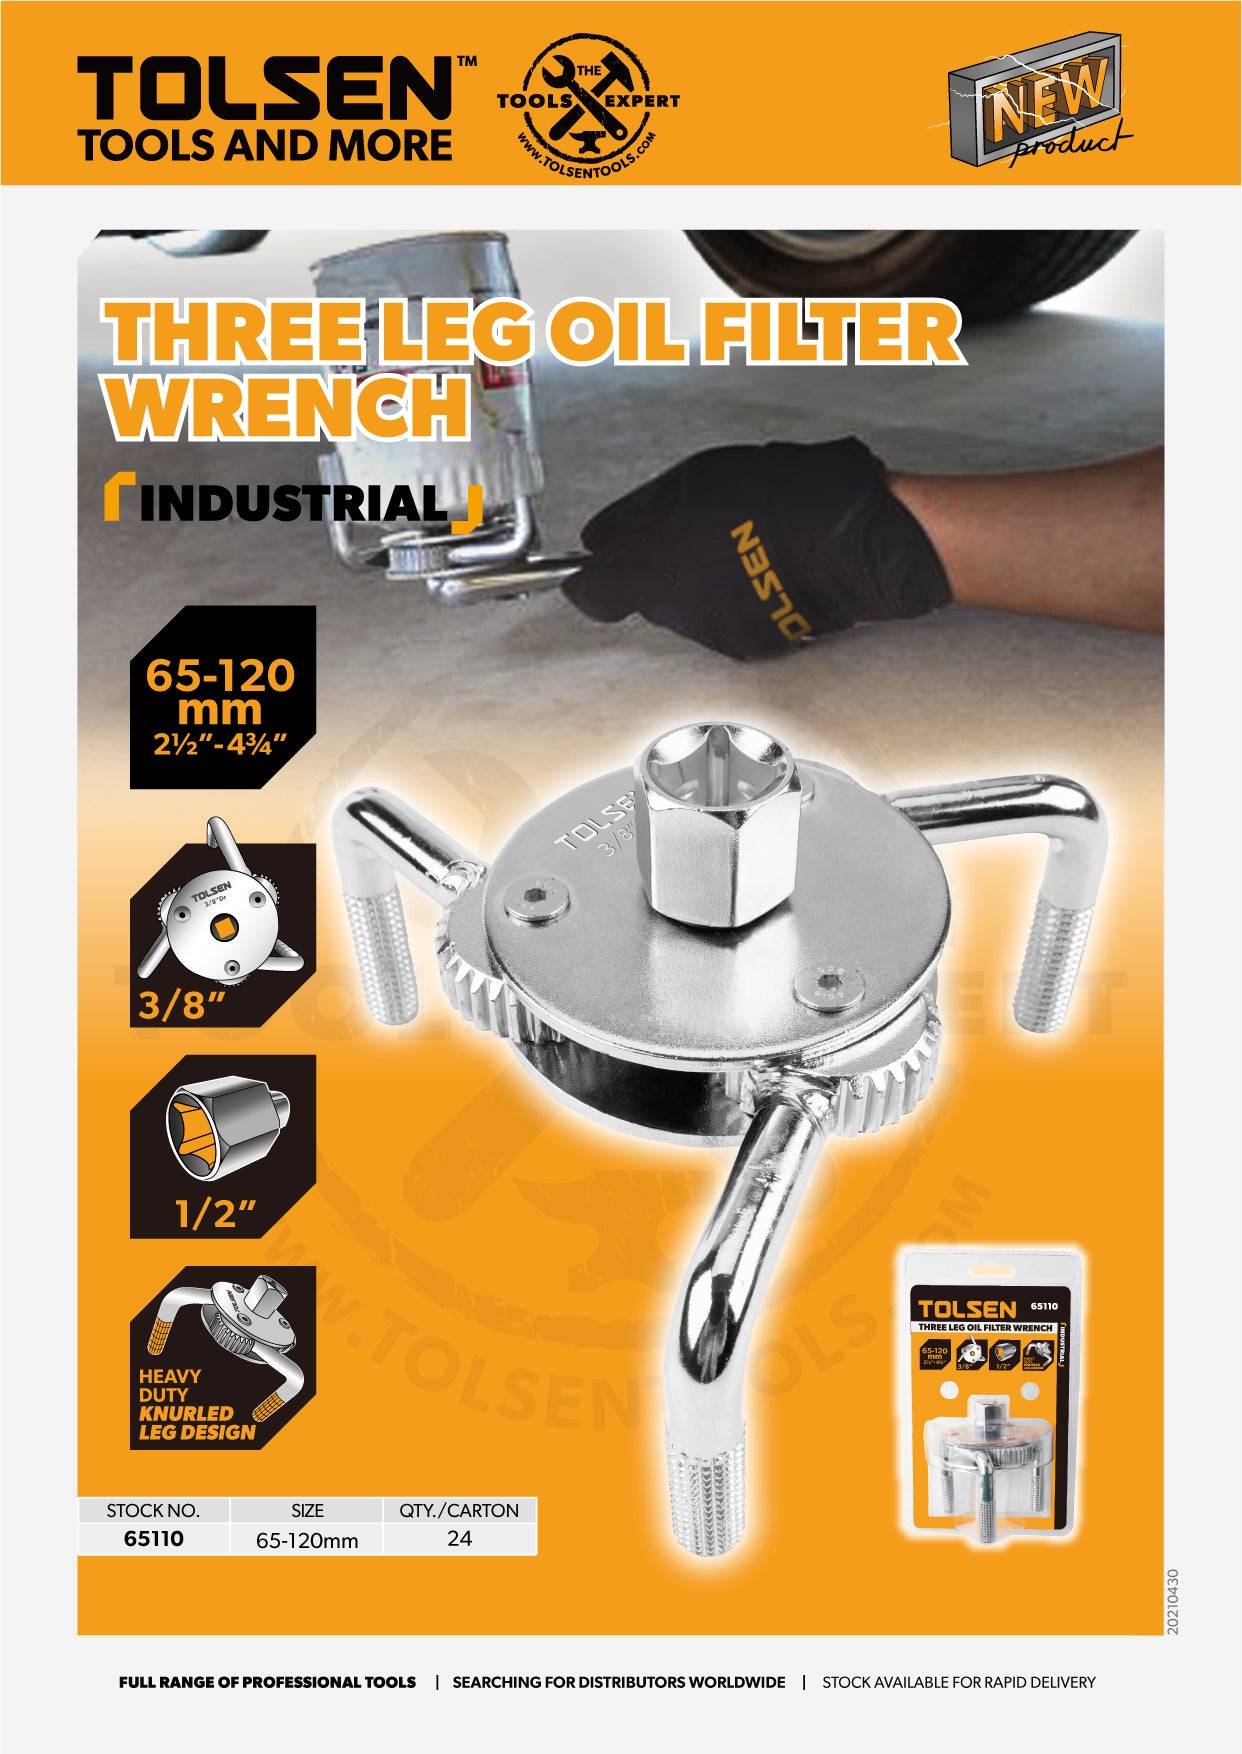 THREE LEG OIL FILTER WRENCH (INDUSTRIAL)